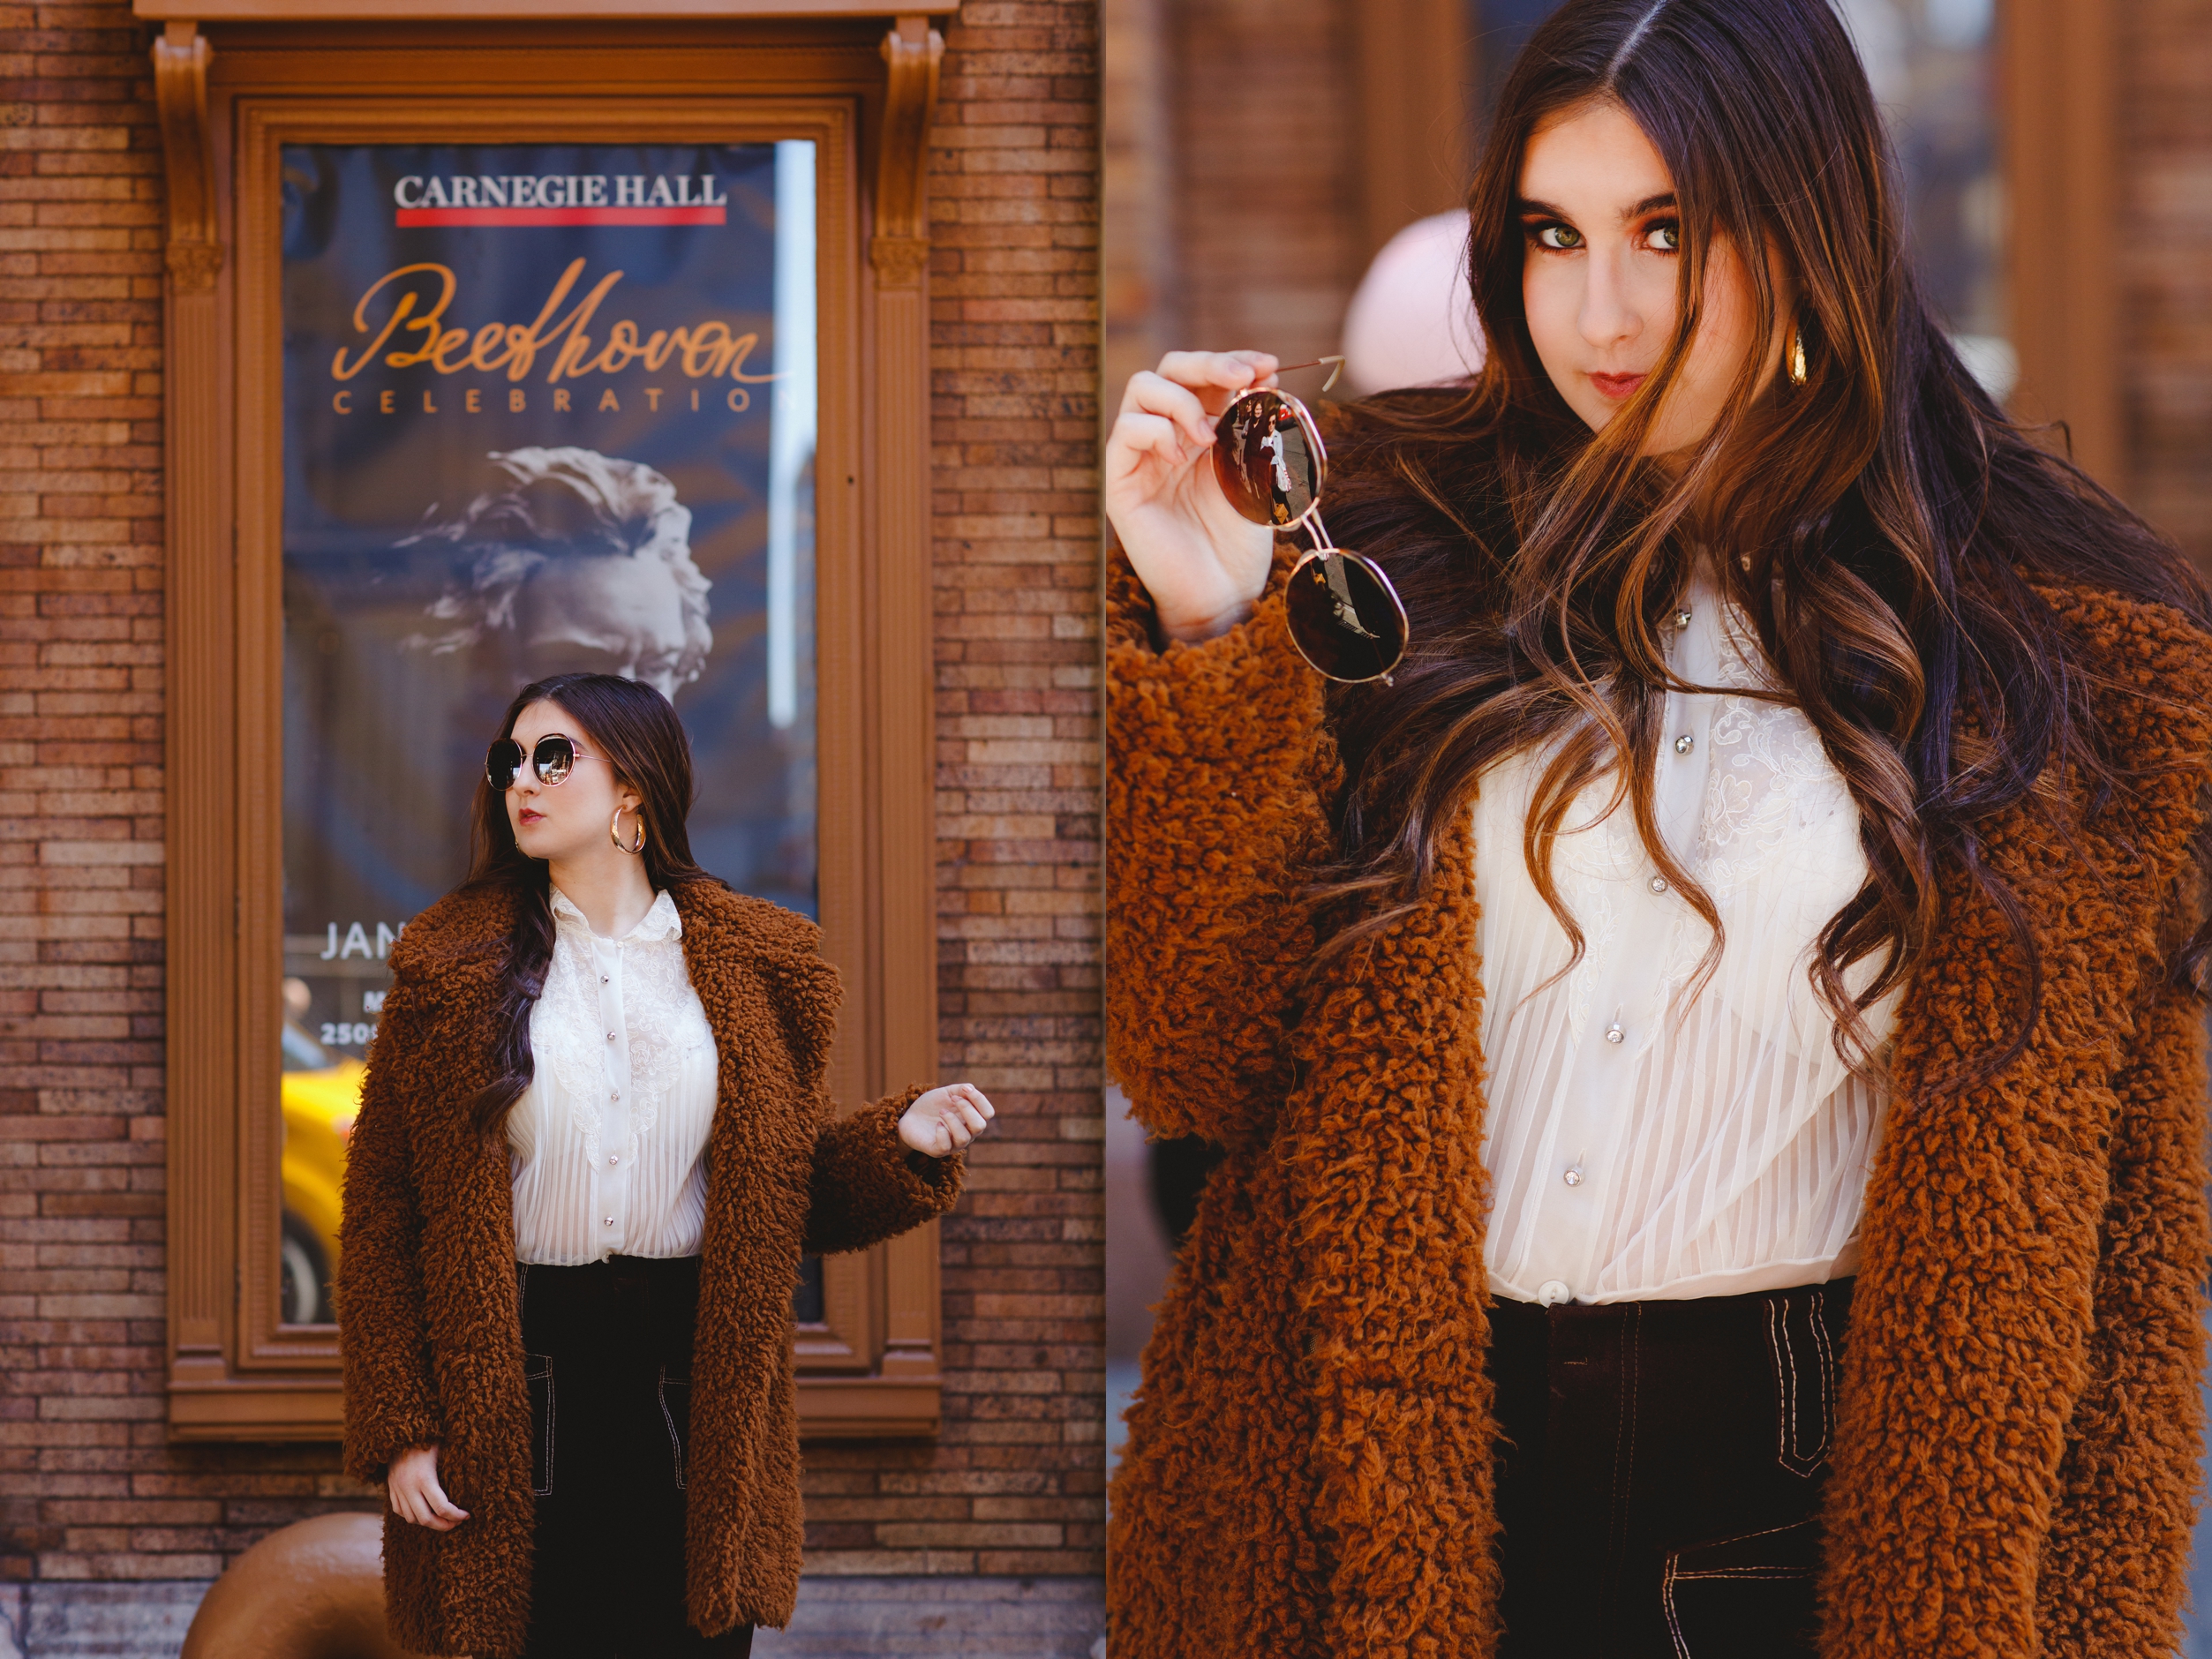 Brunette model with sunglasses wearing vintage fashion outside Carnegie Hall in New York City